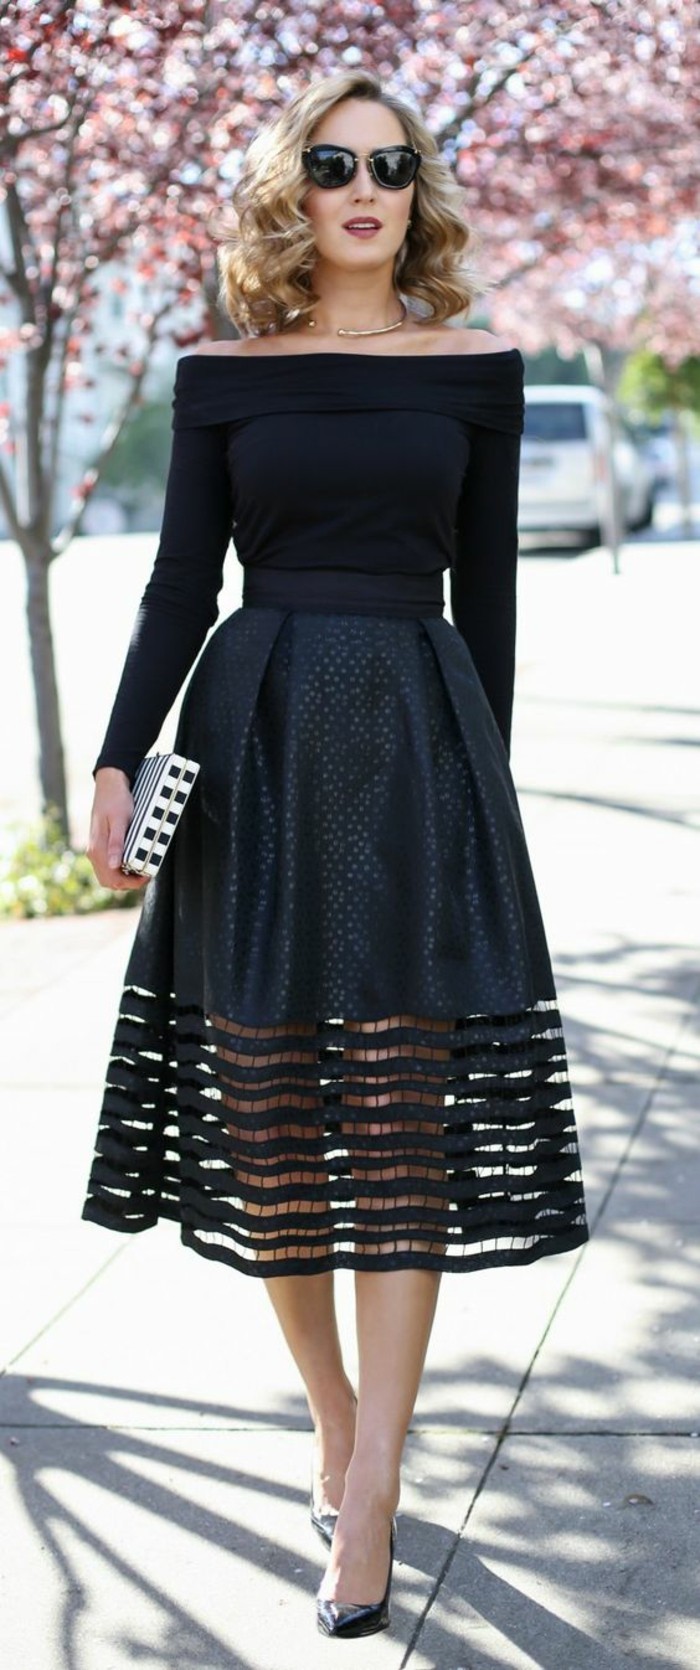 dress attire, blonde woman with shoulder-length curly hair and sunglasses, wearing black off-shoulder sweater, and black embellished skirt, with thick see-through lace hem